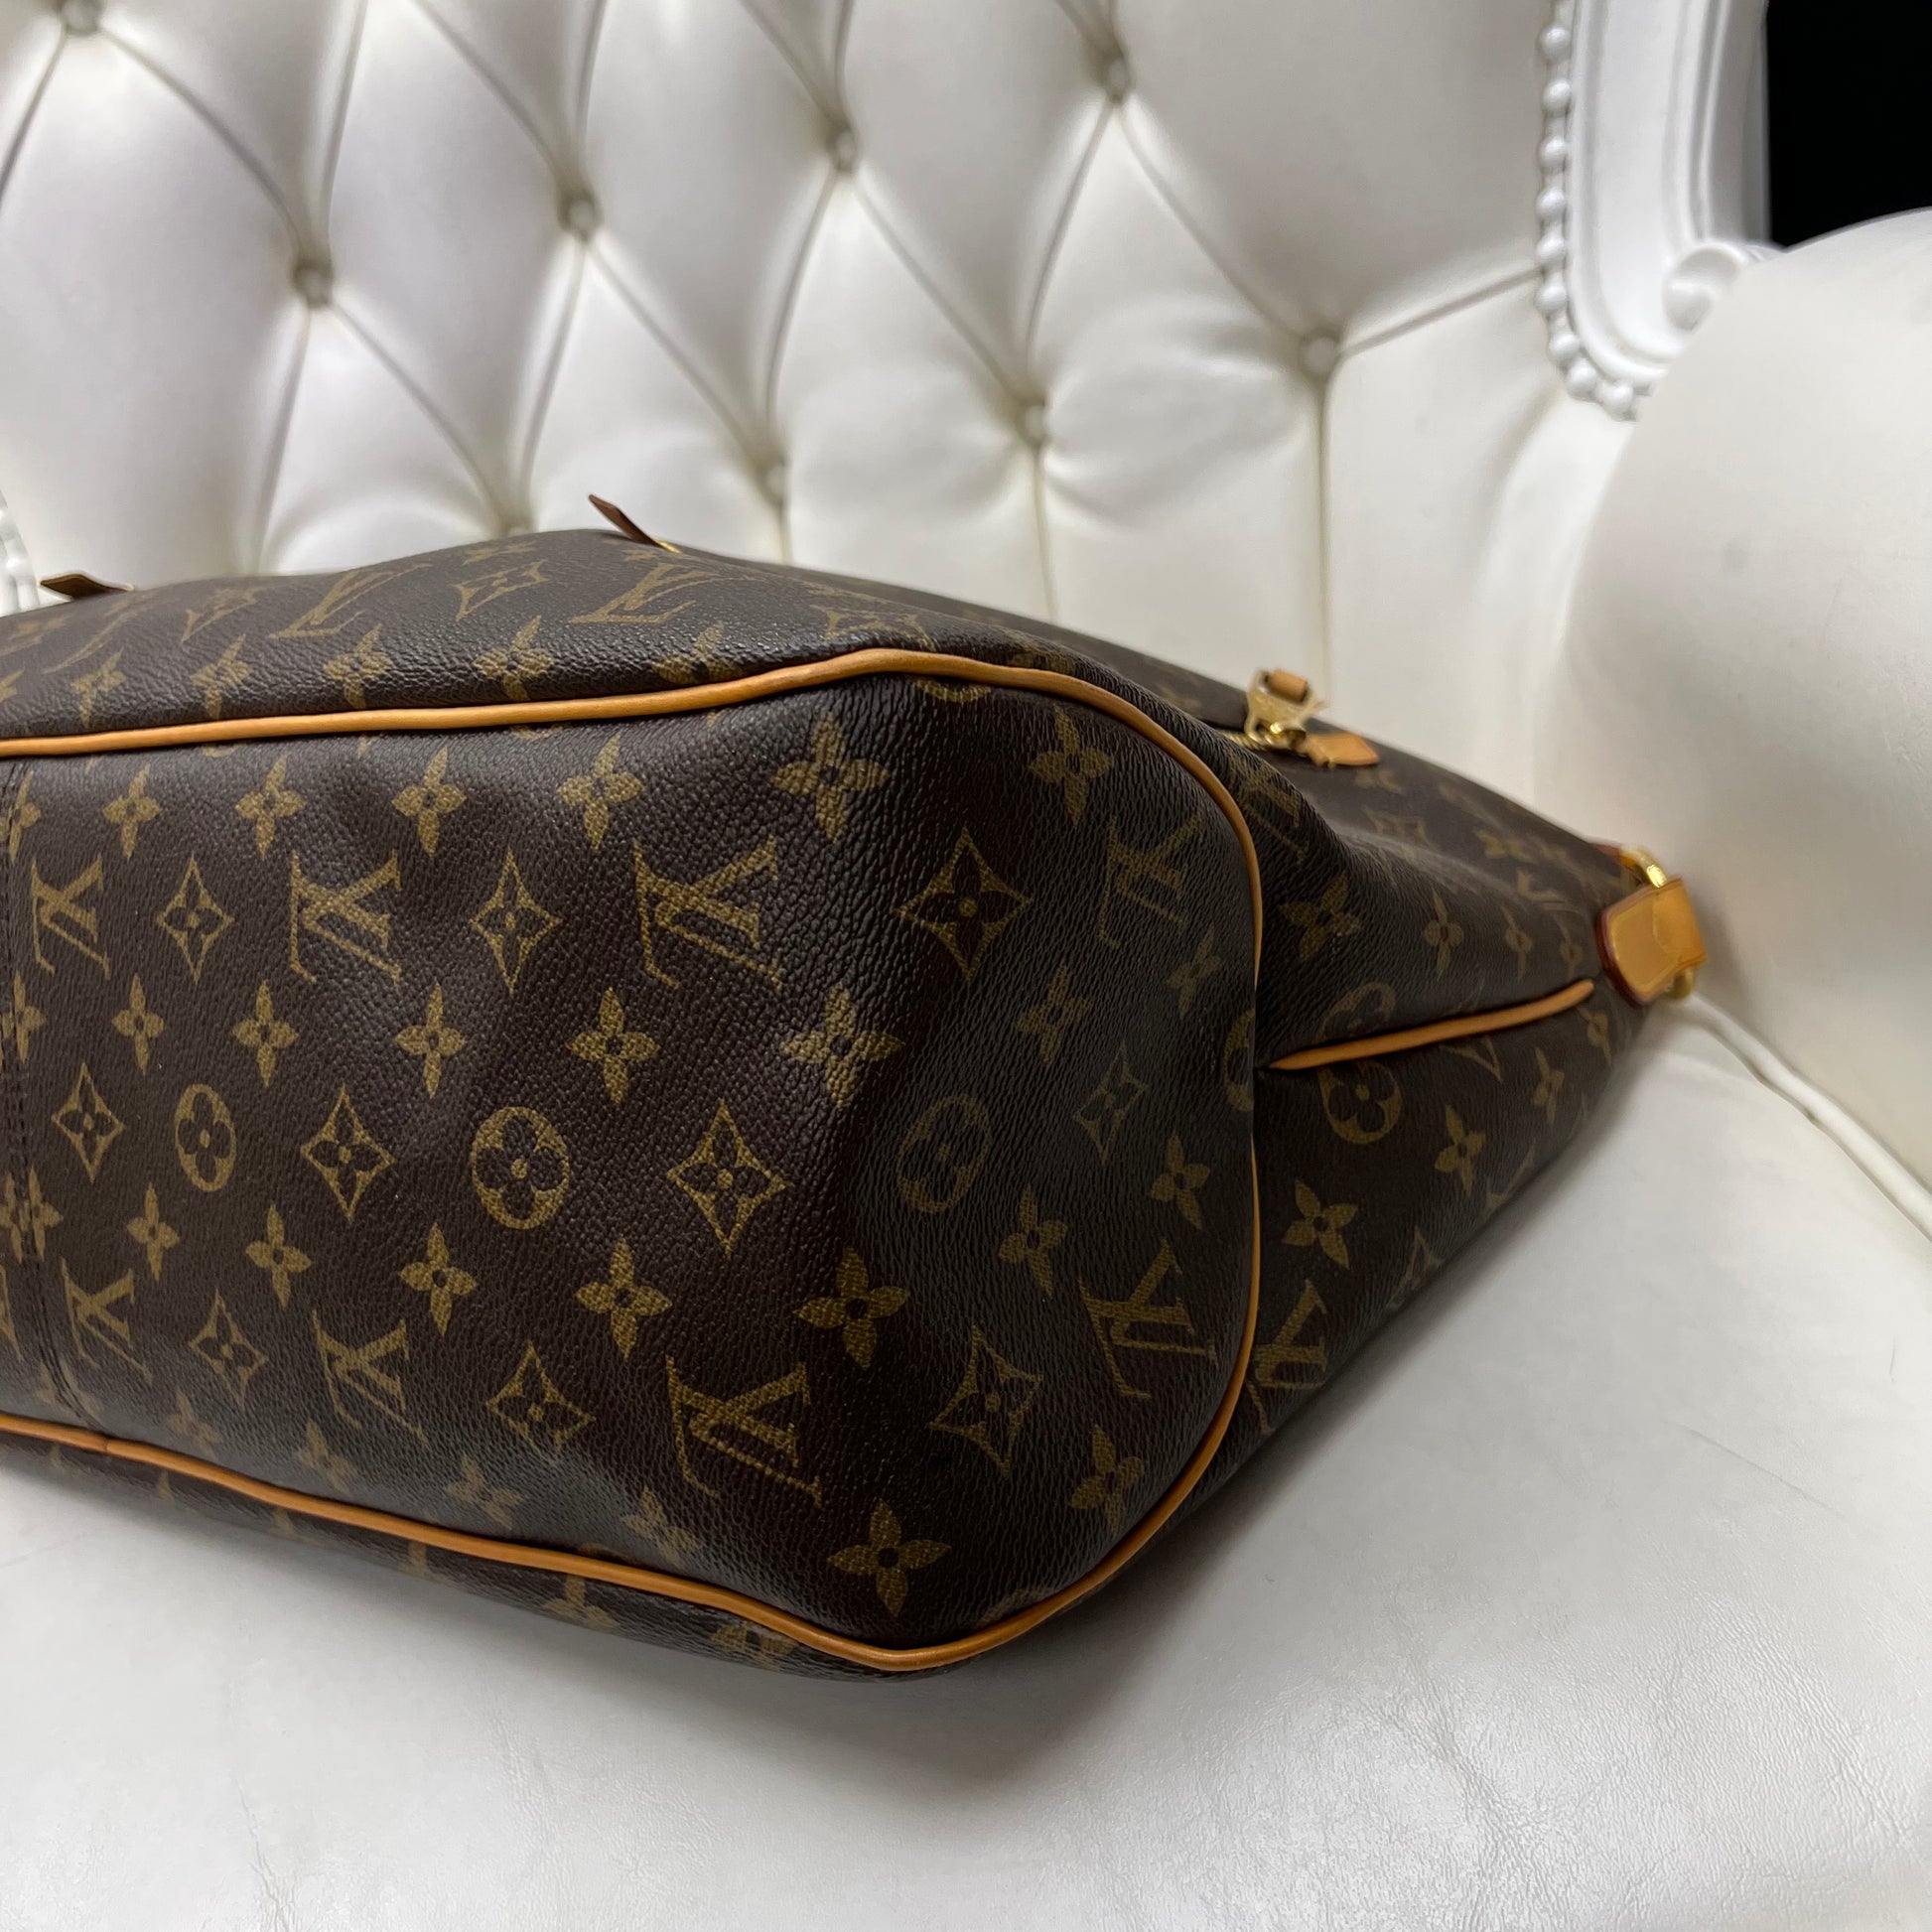 Louis Vuitton Delightful GM and always #authentic when from #jadore #f